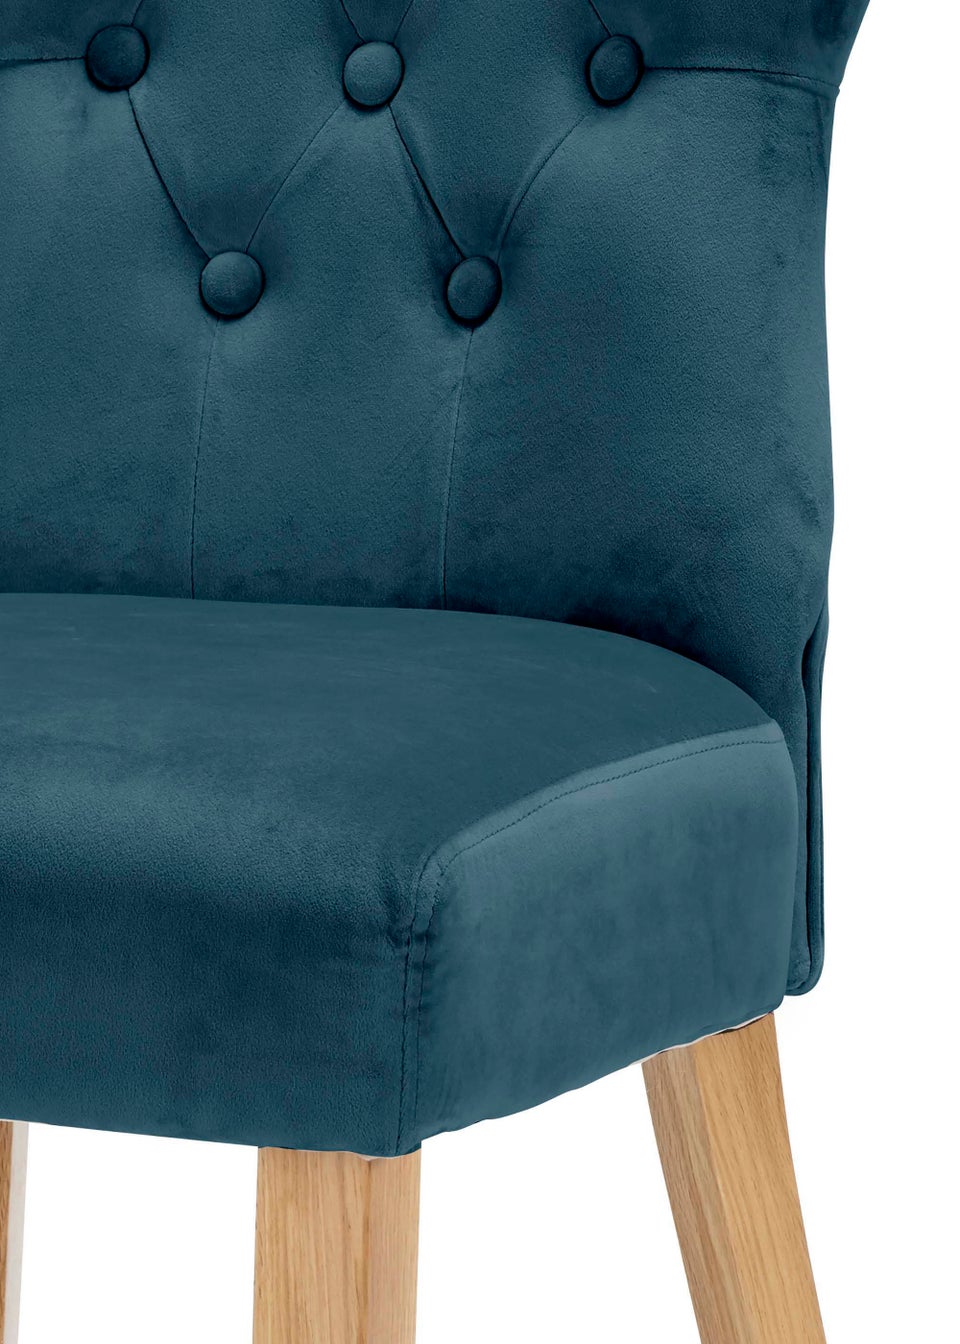 LPD Furniture Set of 2 Naples Dining Chairs Peacock Blue (920x630x460mm)